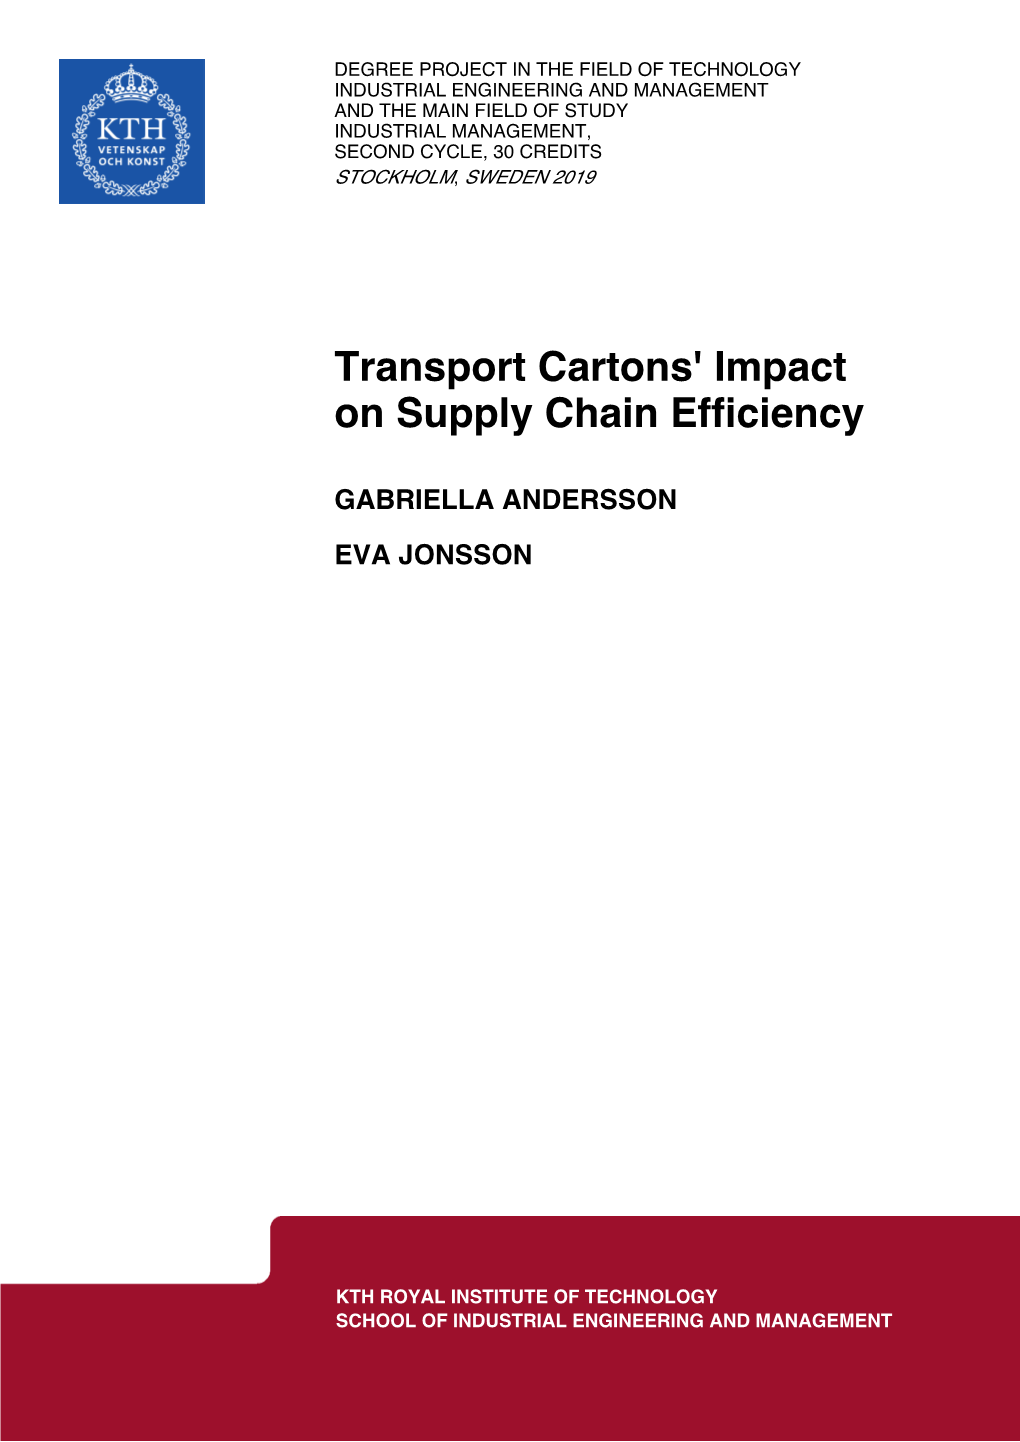 Transport Cartons' Impact on Supply Chain Efficiency